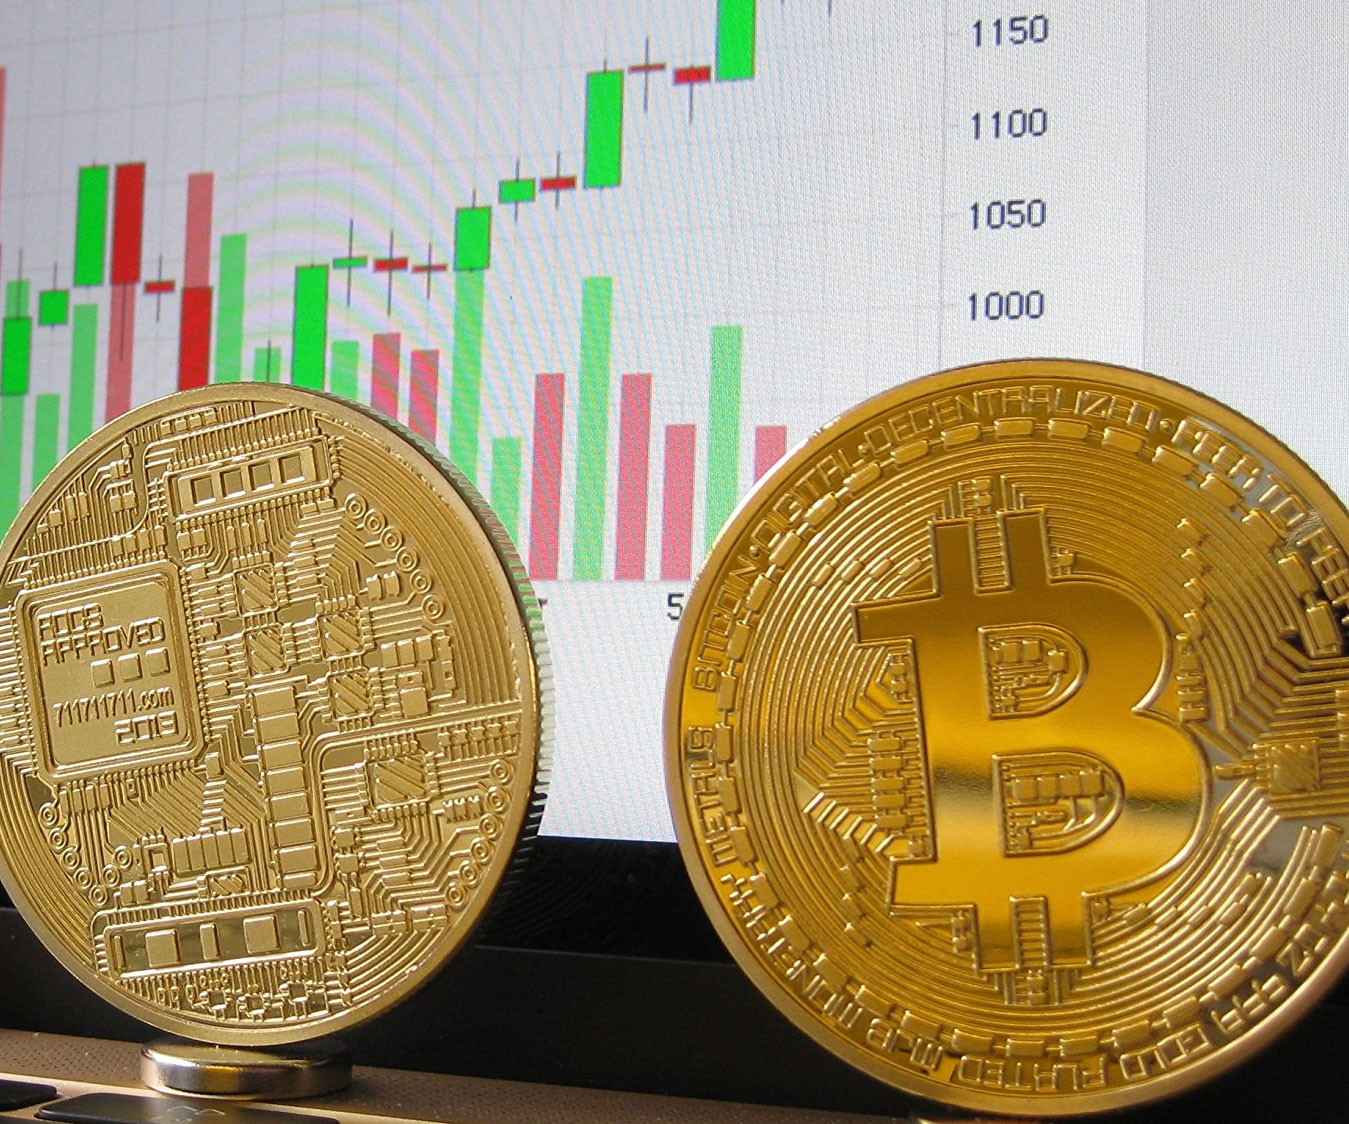 Gold Plated Bitcoins 1